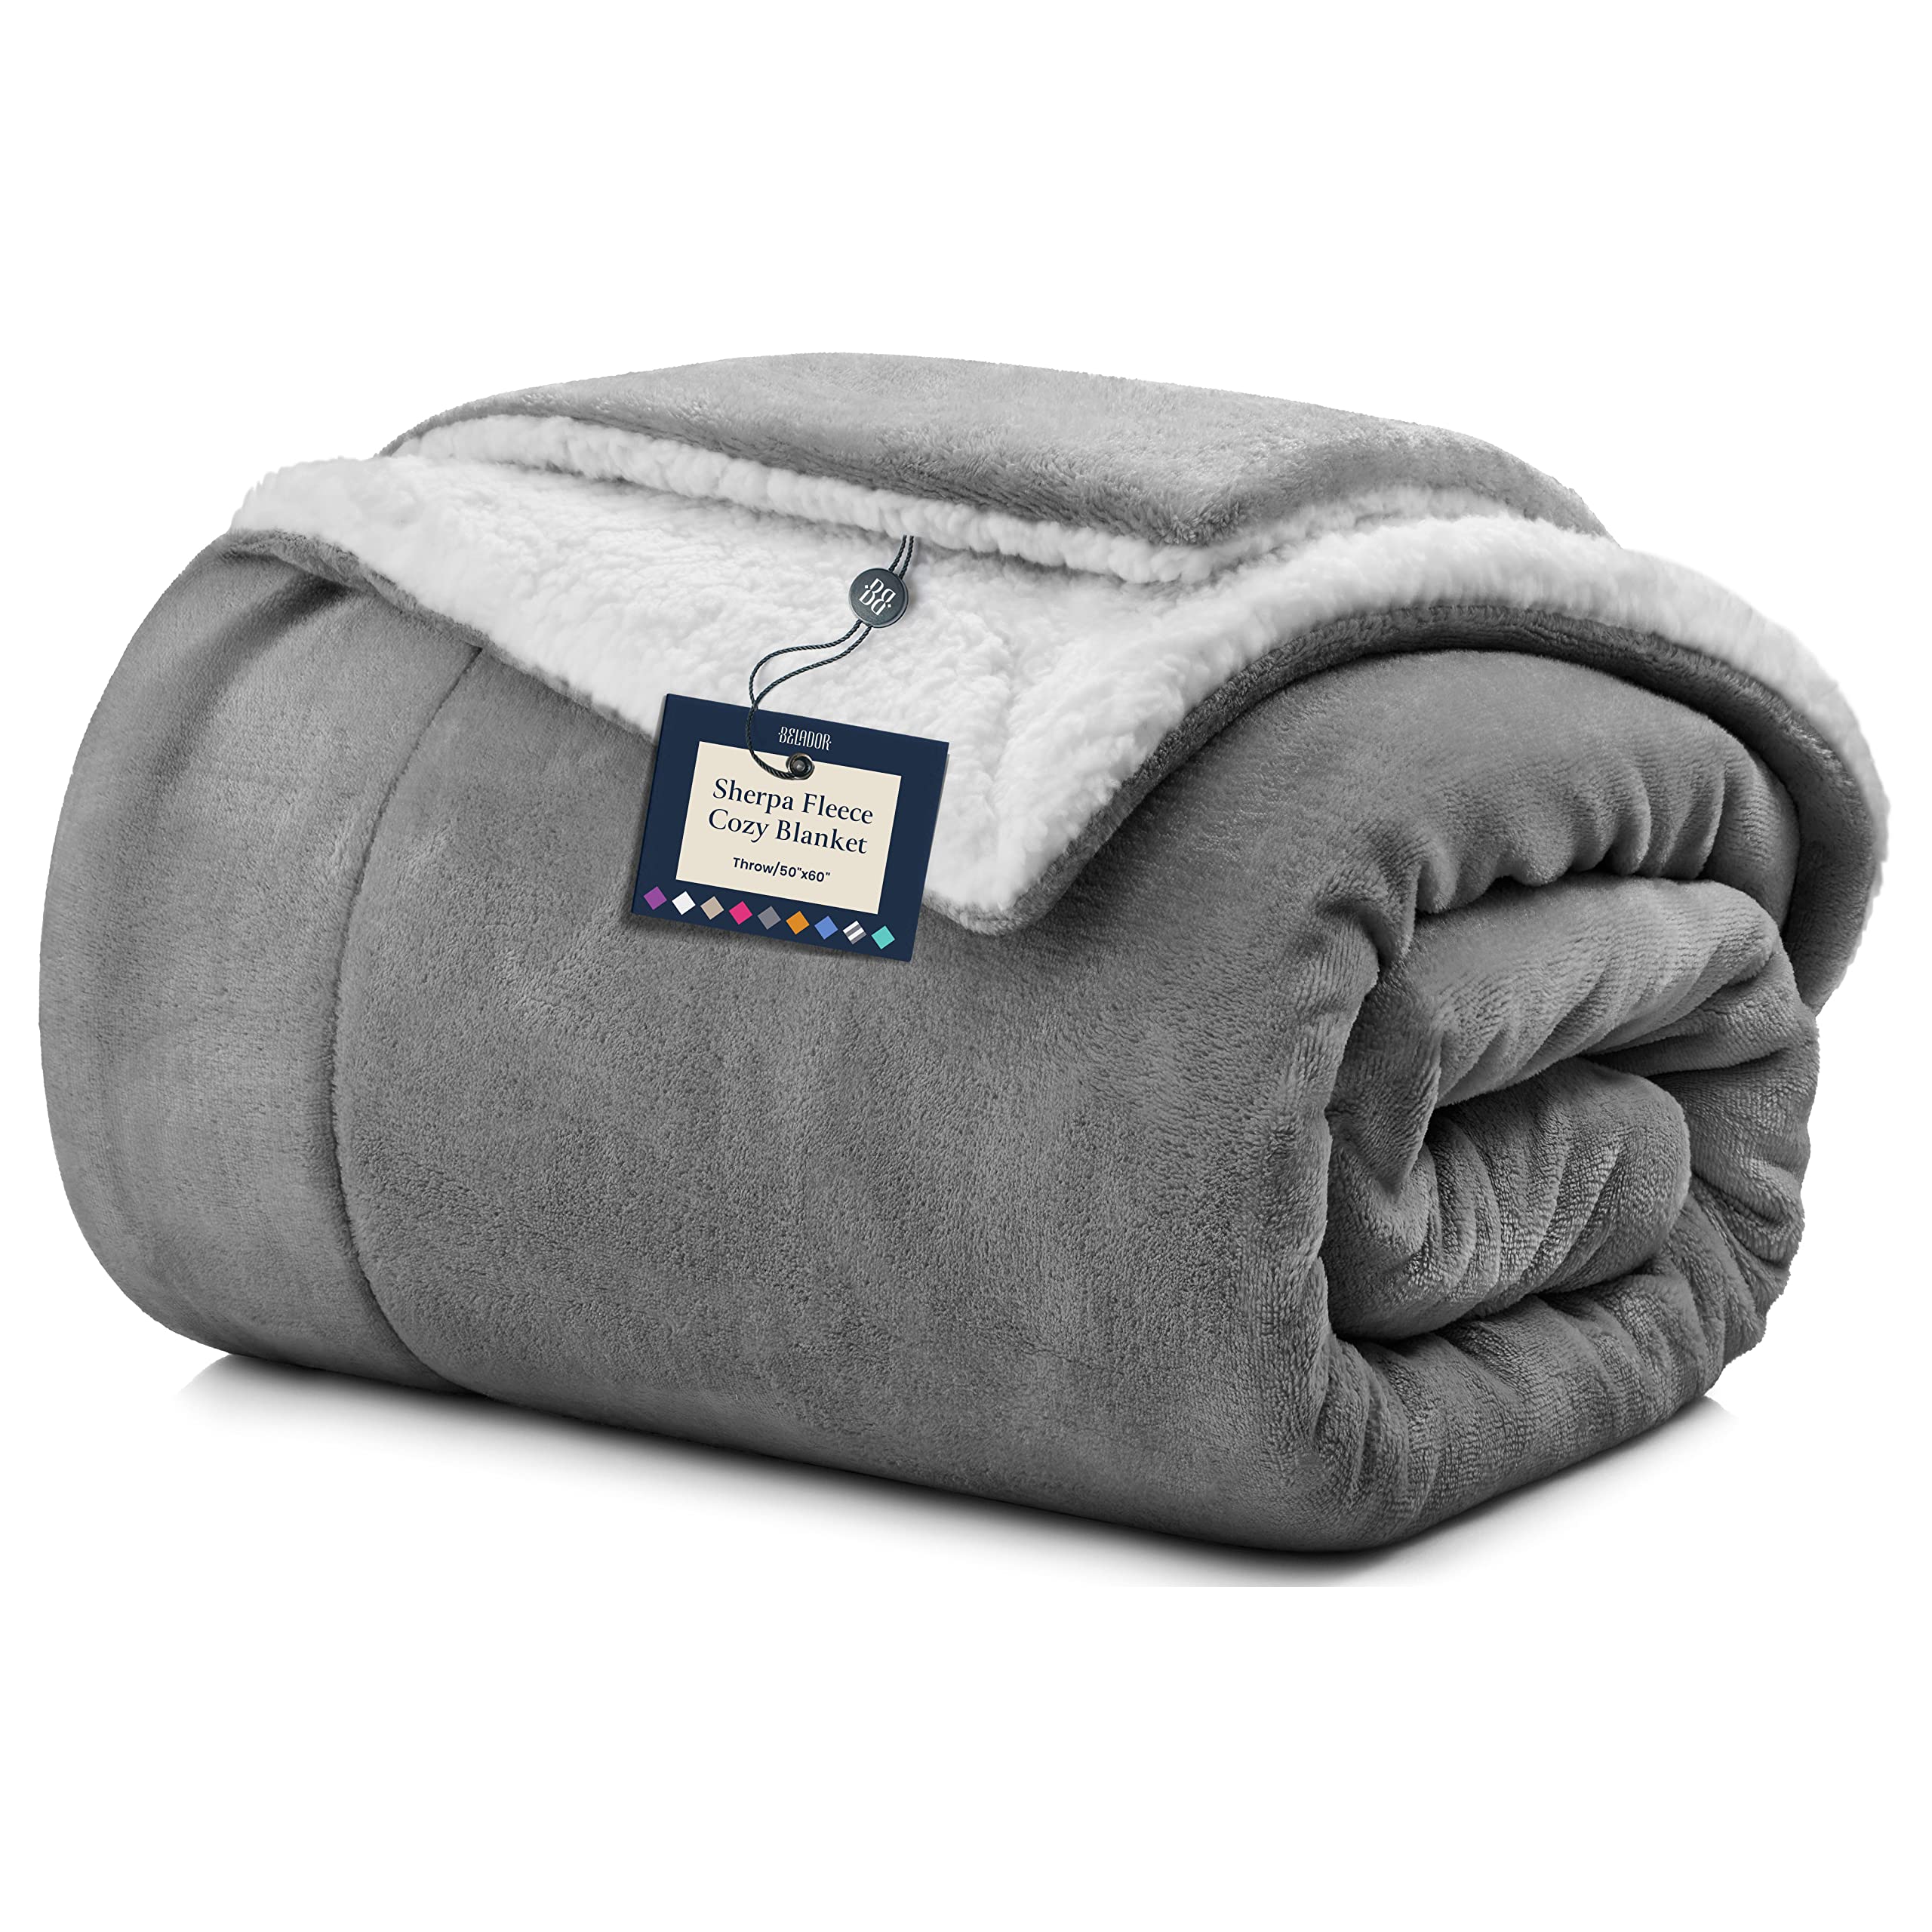 BELADOR 50x60 Fleece Blanket with Sherpa Reverse - Soft, Lightweight, Travel Blanket for Bed and Couch  - Very Good